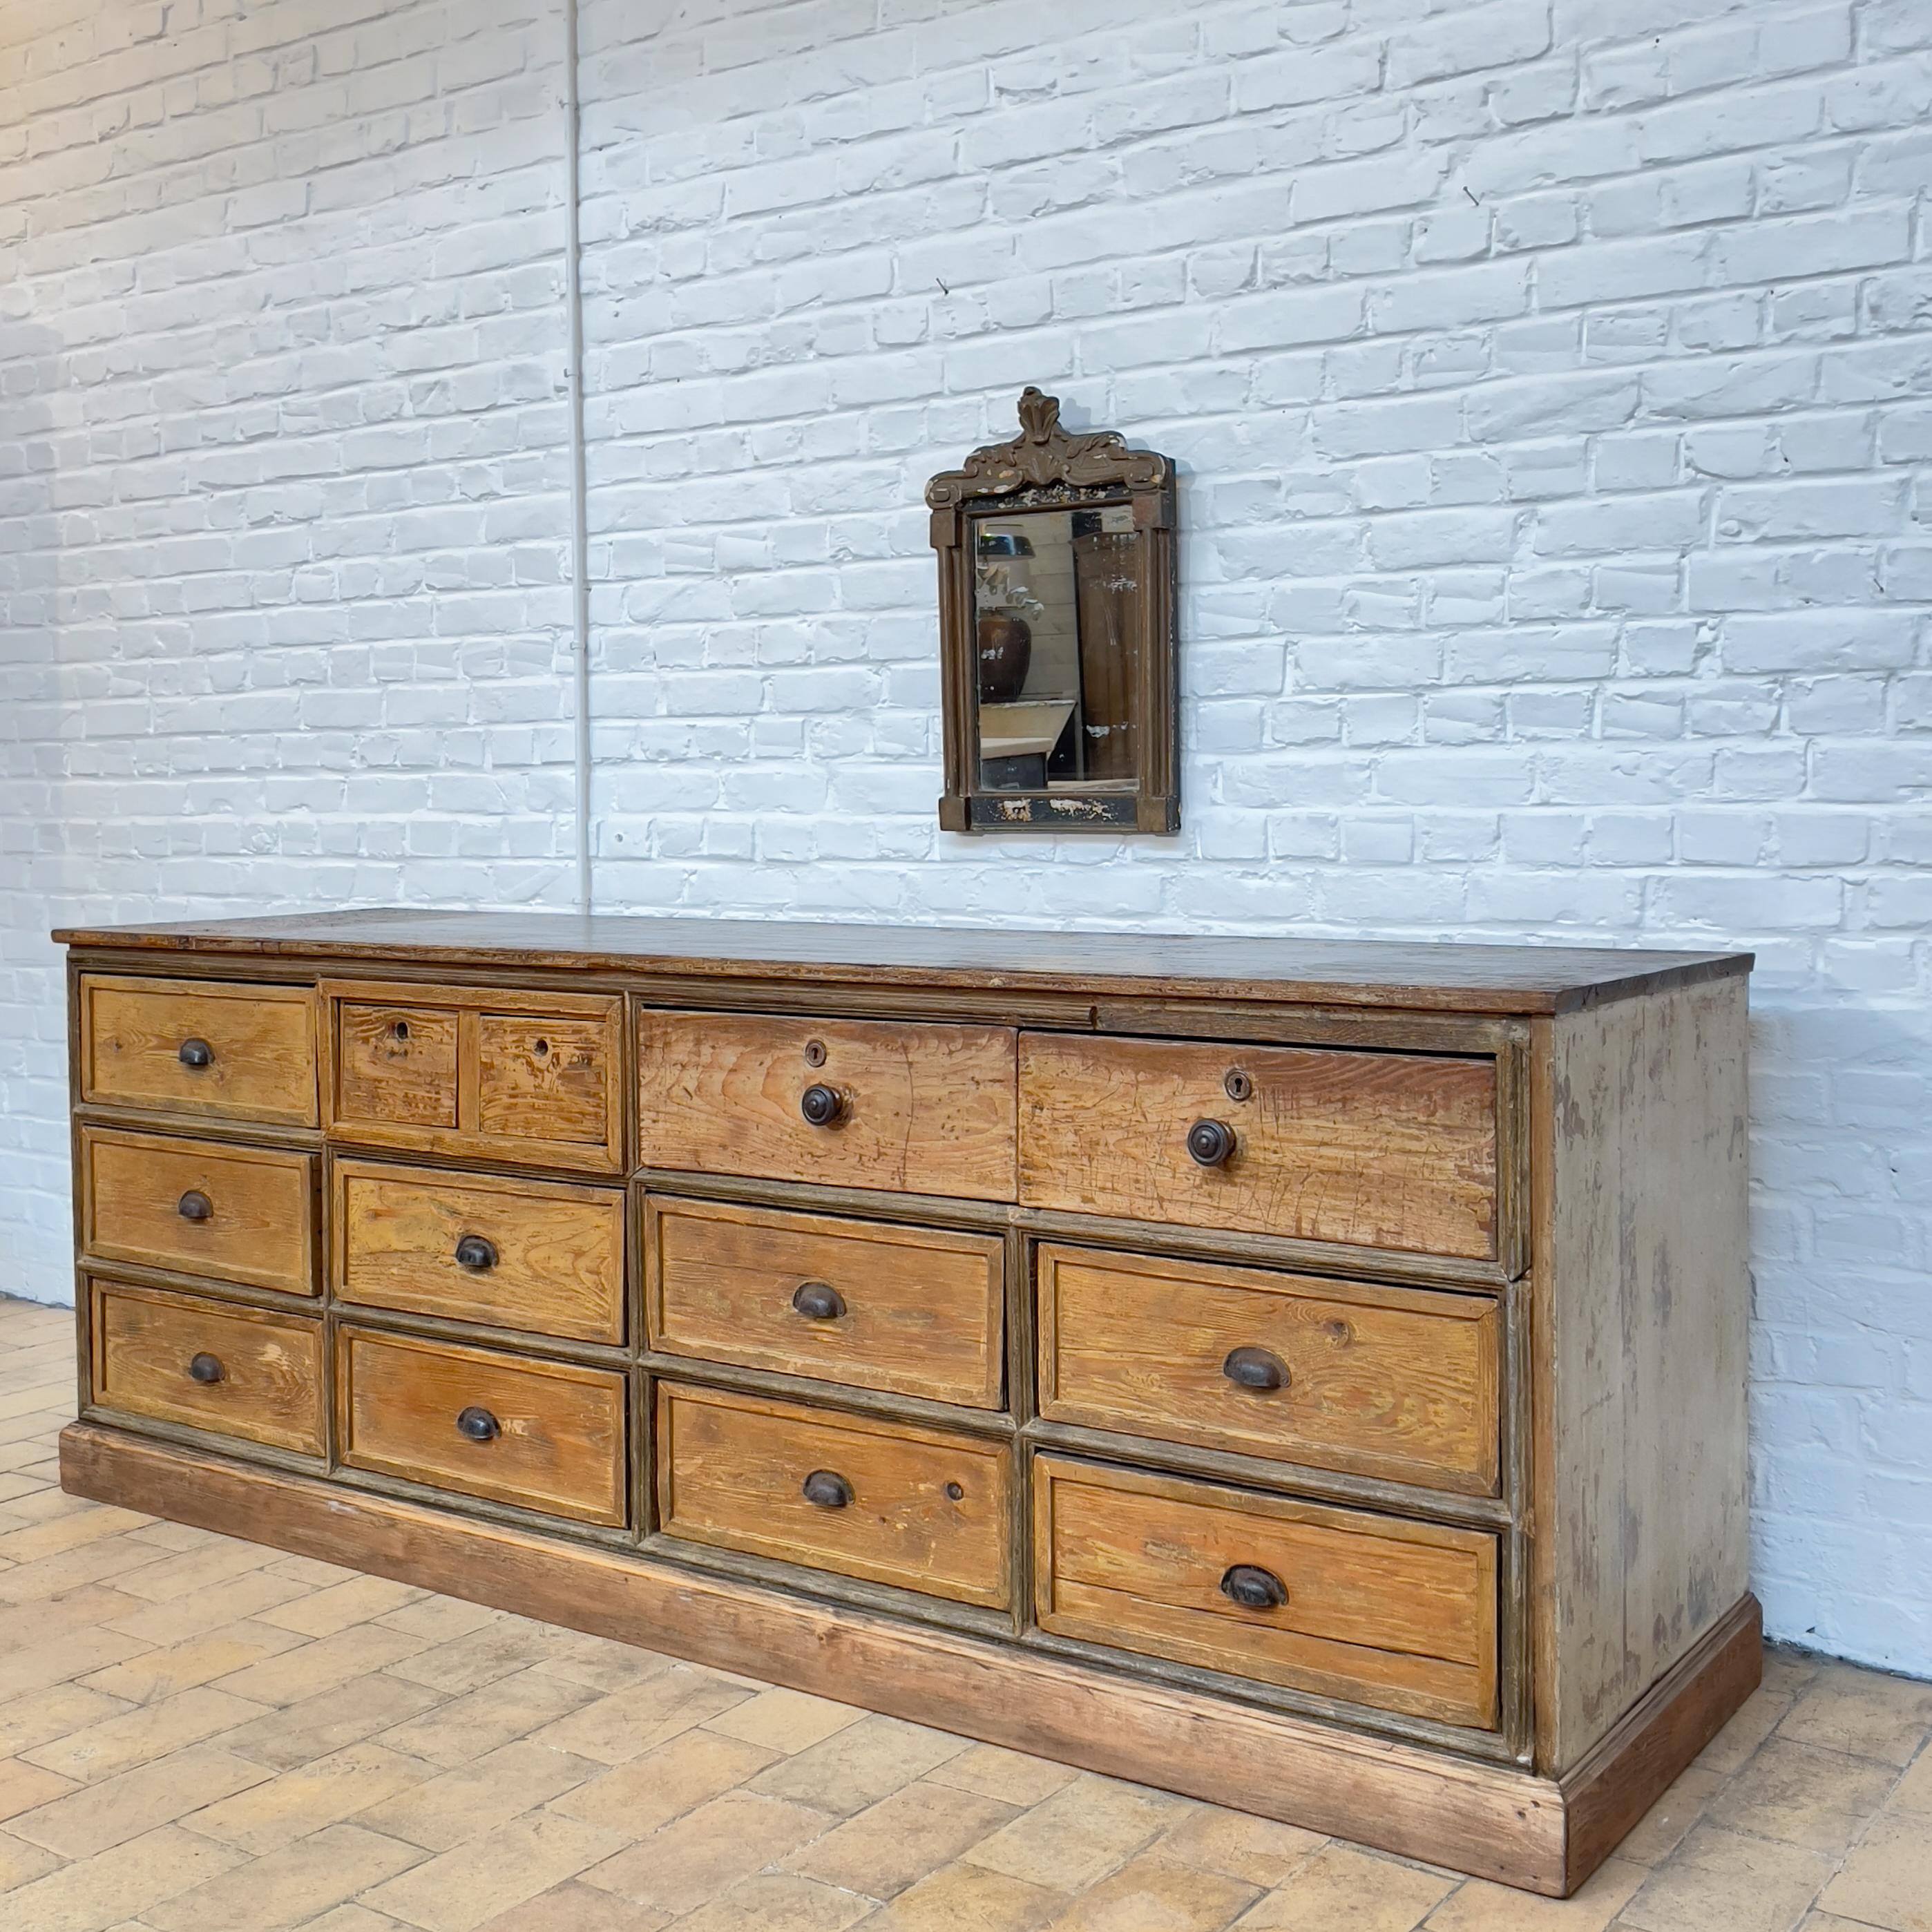 Early 20th Century French Haberdashery Cabinet with Drawers 2